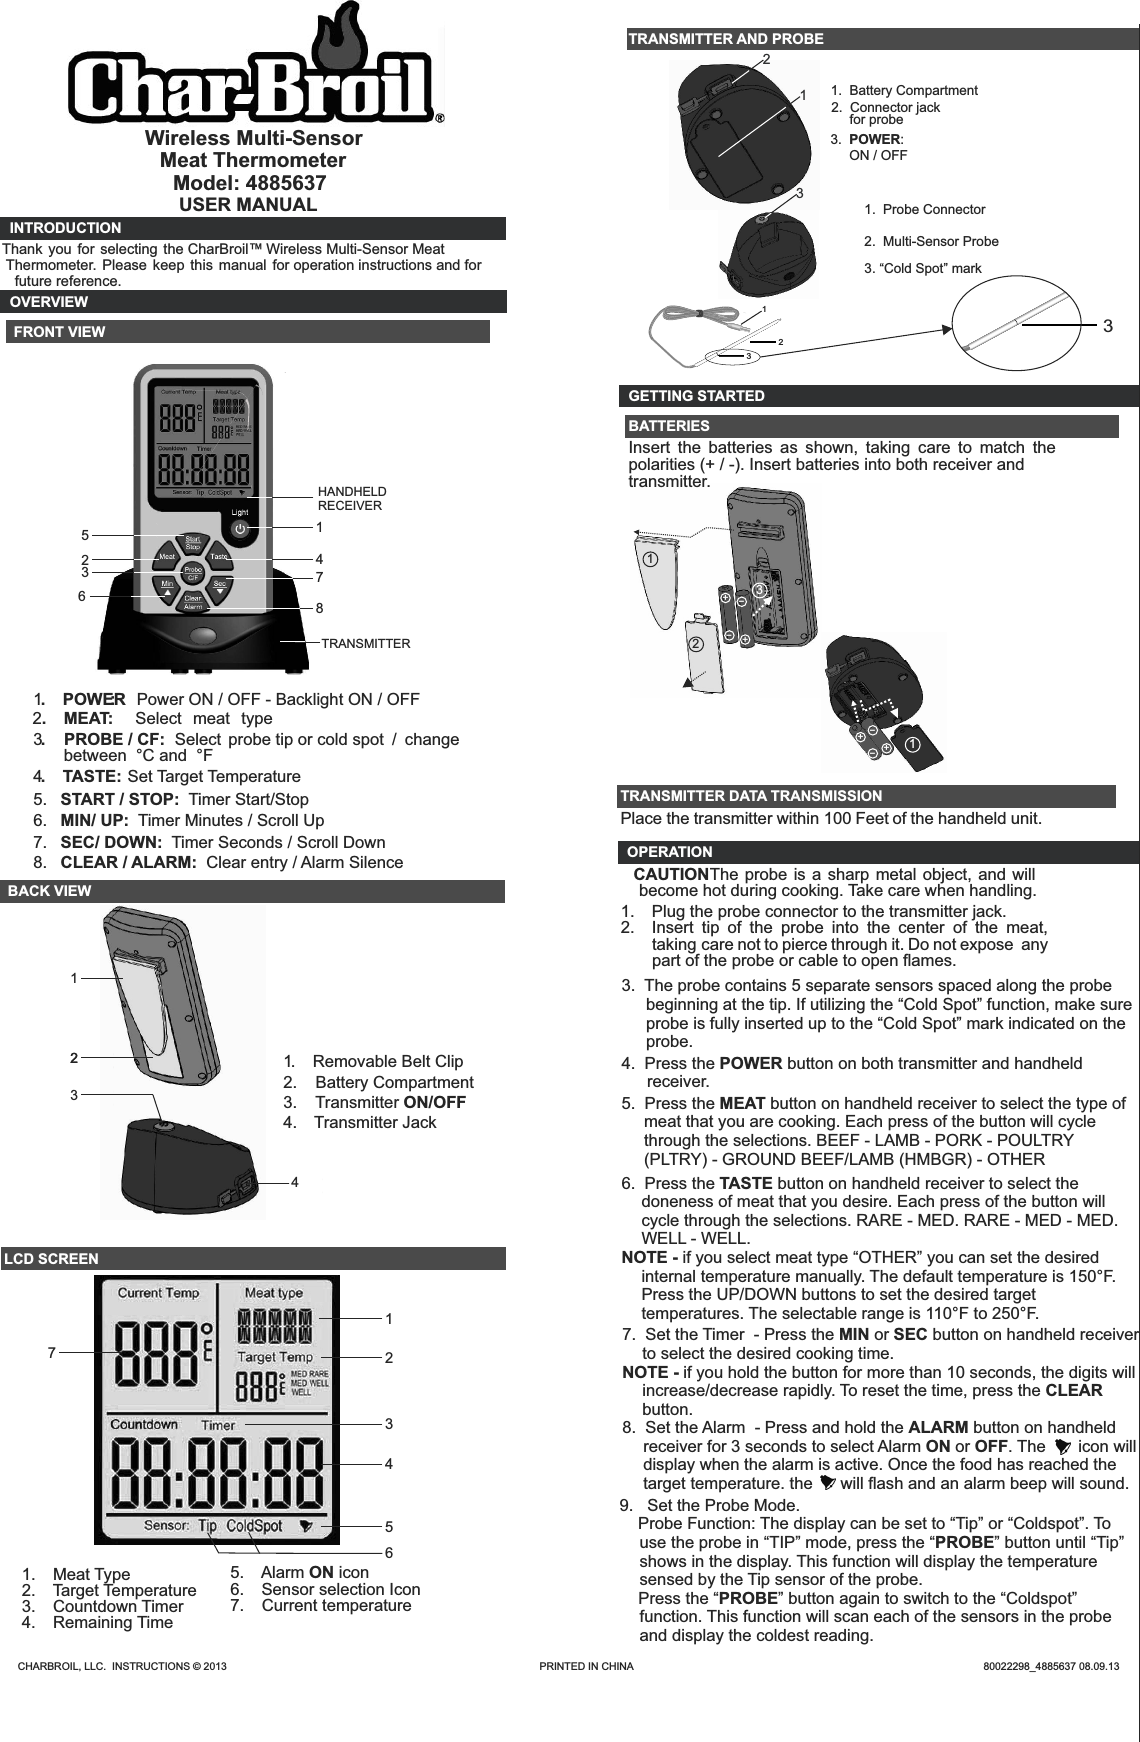 Wireless Multi-SensorModel: 4885637USER MANUALINTRODUCTIONOVERVIEW FRONT VIEWTRANSMITTER2.  MEAT:   Select  meat  type1.  POWER:  Power ON / OFF - Backlight ON / OFF3.    PROBE / CF:  Select probe tip or cold spot  /  change between  °C and  °F4.  TASTE:   S et Target Temperature5.  BACK VIEW             1.  Removable Belt Clip2.    Battery Compartment3.    Transmitter ON/OFF4.  Transmitter JackLCD SCREEN                    1.  Meat Type 2.  Target Temperature3.  Countdown Timer4.  Remaining Time 5.  Alarm ON icon6.  Sensor selection Icon7.  Current temperatureTRANSMITTER AND PROBE 1.  Battery Compartment3.  POWER: ON / OFF2.  Connector jack for probe121.  Probe Connector 2.  Multi-Sensor Probe  GETTING STARTEDBATTERIESInsert  the  batteries  as  shown,  taking  care  to  match  the polarities (+ / -). Insert batteries into both receiver andTRANSMITTER DATA TRANSMISSIONPlace the transmitter within 100 Feet of the handheld unit. OPERATION CAUTION The probe is a sharp metal  object, and will become hot during cooking. Take care when handling.1.  Plug the probe connector to the transmitter jack. 2.  Insert  tip  of  the  probe  into  the  center  of  the  meat, taking  care not to pierce through it. Do not expose  any part of the probe or cable to open ﬂ ames.Thank you  for  selecting the CharBroil™  Wireless Multi-Sensor Meat  Thermometer.  Please  keep  this  manual  for  operation instructions and for future reference.2345START / STOP:  Timer Start/Stop7686.  MIN/ UP:  Timer Minutes / Scroll Up7.  SEC/ DOWN:  Timer Seconds / Scroll Down8.  CLEAR / ALARM:  Clear entry / Alarm Silence1HANDHELD RECEIVER123242314567Meat Thermometer12312++--31+--+transmitter.3.  The probe contains 5 separate sensors spaced along the probe beginning at the tip. If utilizing the “Cold Spot” function, make sure probe is fully inserted up to the “Cold Spot” mark indicated on the probe.4.  Press the POWER button on both transmitter and handheld receiver.5.  Press the MEAT button on handheld receiver to select the type of meat that you are cooking. Each press of the button will cycle through the selections. BEEF - LAMB - PORK - POULTRY (PLTRY) - GROUND BEEF/LAMB (HMBGR) - OTHER6.  Press the TASTE button on handheld receiver to select the doneness of meat that you desire. Each press of the button will cycle through the selections. RARE - MED. RARE - MED - MED. WELL - WELL. NOTE - if you select meat type “OTHER” you can set the desired internal temperature manually. The default temperature is 150°F. Press the UP/DOWN buttons to set the desired target temperatures. The selectable range is 110°F to 250°F. 7.  Set the Timer  - Press the MIN or SEC button on handheld receiver to select the desired cooking time.NOTE - if you hold the button for more than 10 seconds, the digits will increase/decrease rapidly. To reset the time, press the CLEAR button.8.  Set the Alarm  - Press and hold the ALARM button on handheld receiver for 3 seconds to select Alarm ON or OFF. The       icon will display when the alarm is active. Once the food has reached the target temperature. the      will ﬂash and an alarm beep will sound. 9.   Set the Probe Mode.    Probe Function: The display can be set to “Tip” or “Coldspot”. To use the probe in “TIP” mode, press the “PROBE” button until “Tip” shows in the display. This function will display the temperature sensed by the Tip sensor of the probe.   Press the “PROBE” button again to switch to the “Coldspot” function. This function will scan each of the sensors in the probe and display the coldest reading. CHARBROIL, LLC.  INSTRUCTIONS © 2013                                                                                                              PRINTED IN CHINA                                                                                                                           80022298_4885637 08.09.1333. “Cold Spot” mark 3